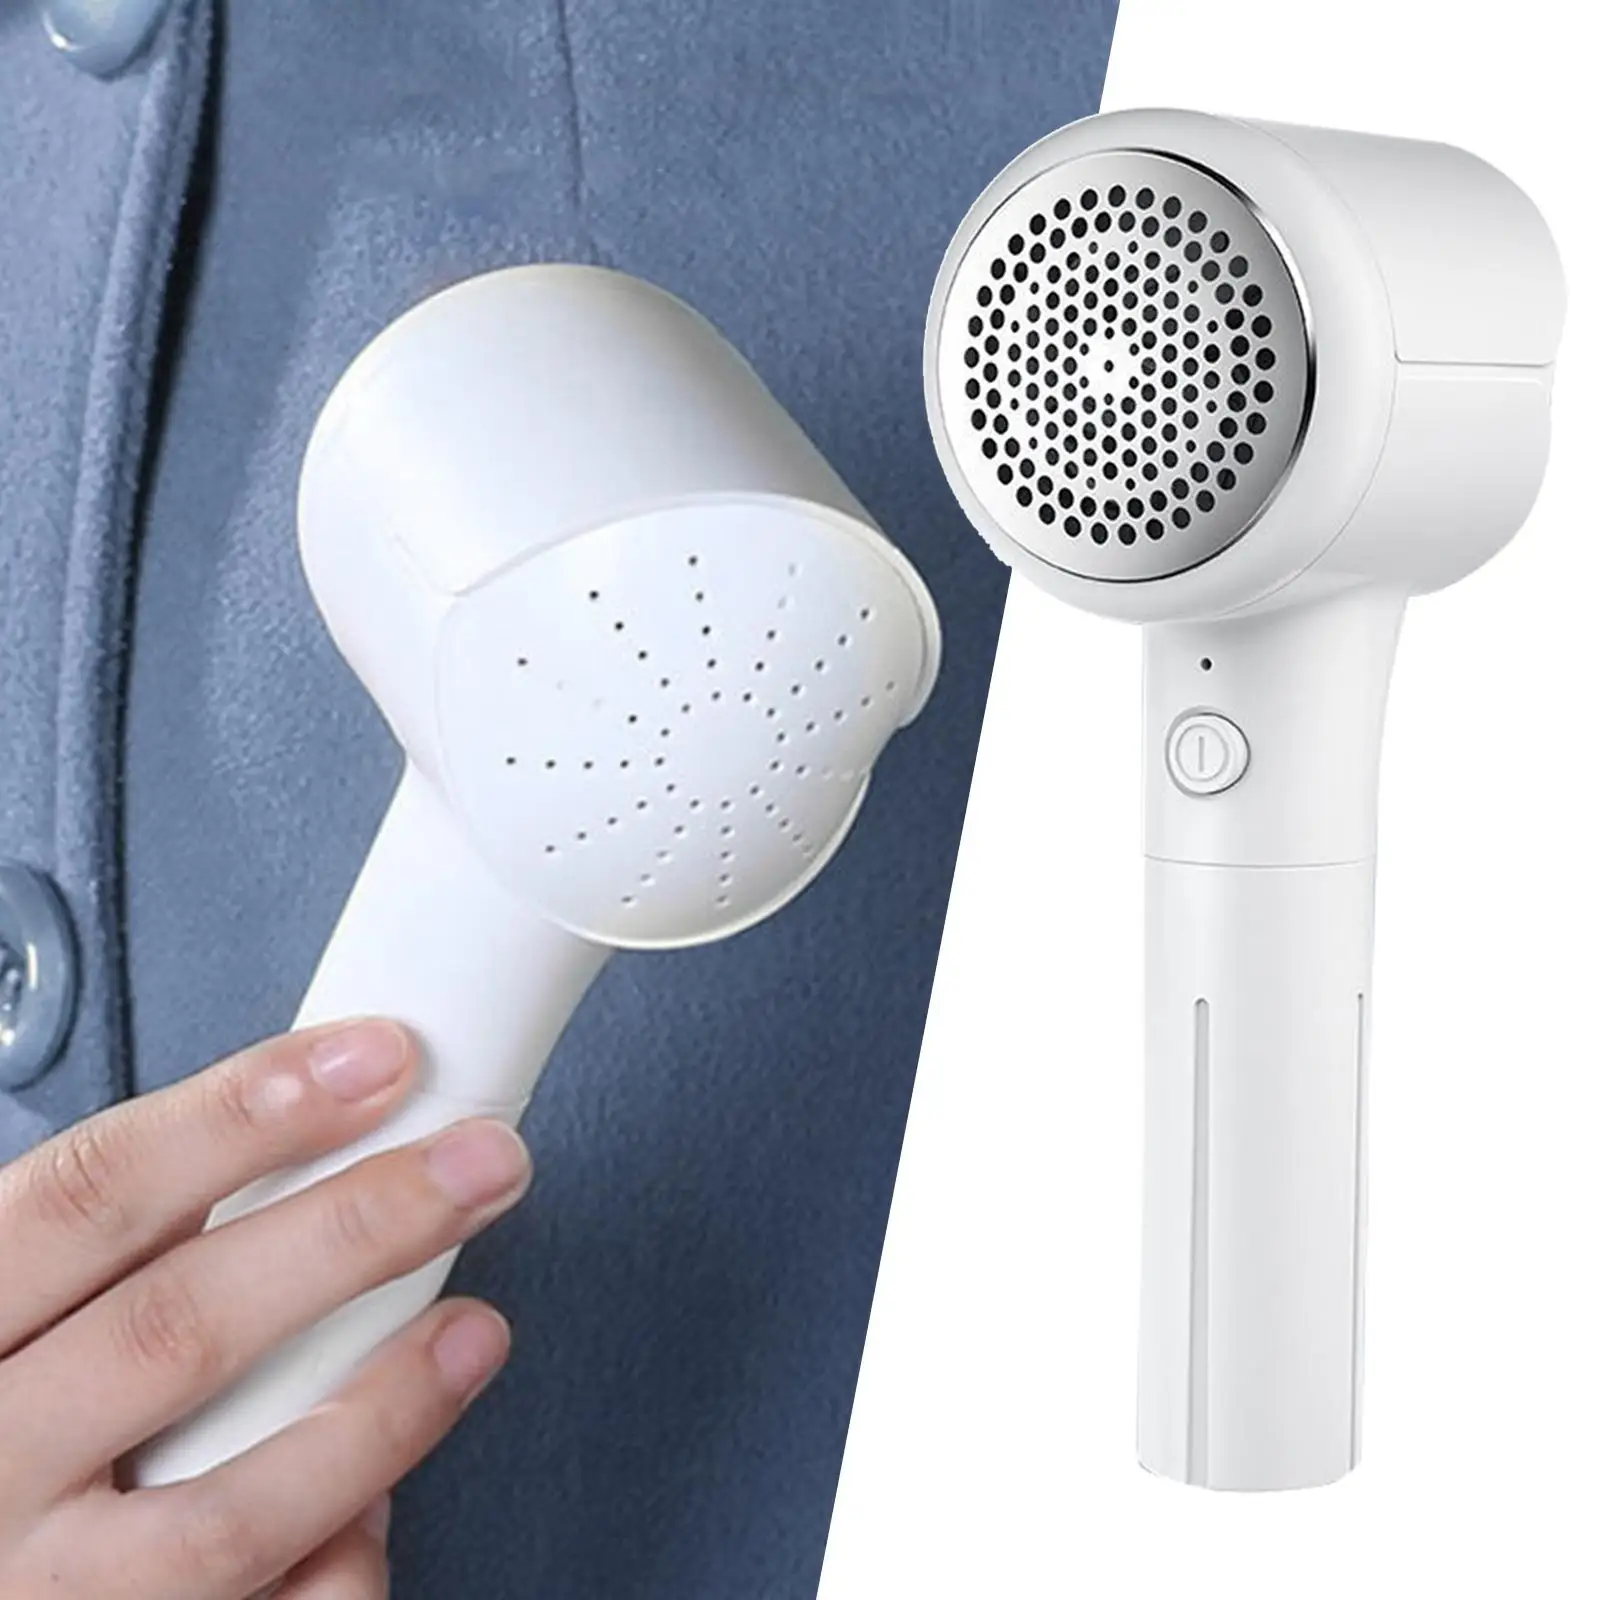 Wireless Lint Remover Stainless Steel Blade Removal Removal Tool Trimmer Portable Lint Shaver for Bedding Cotton Sweater Blanket